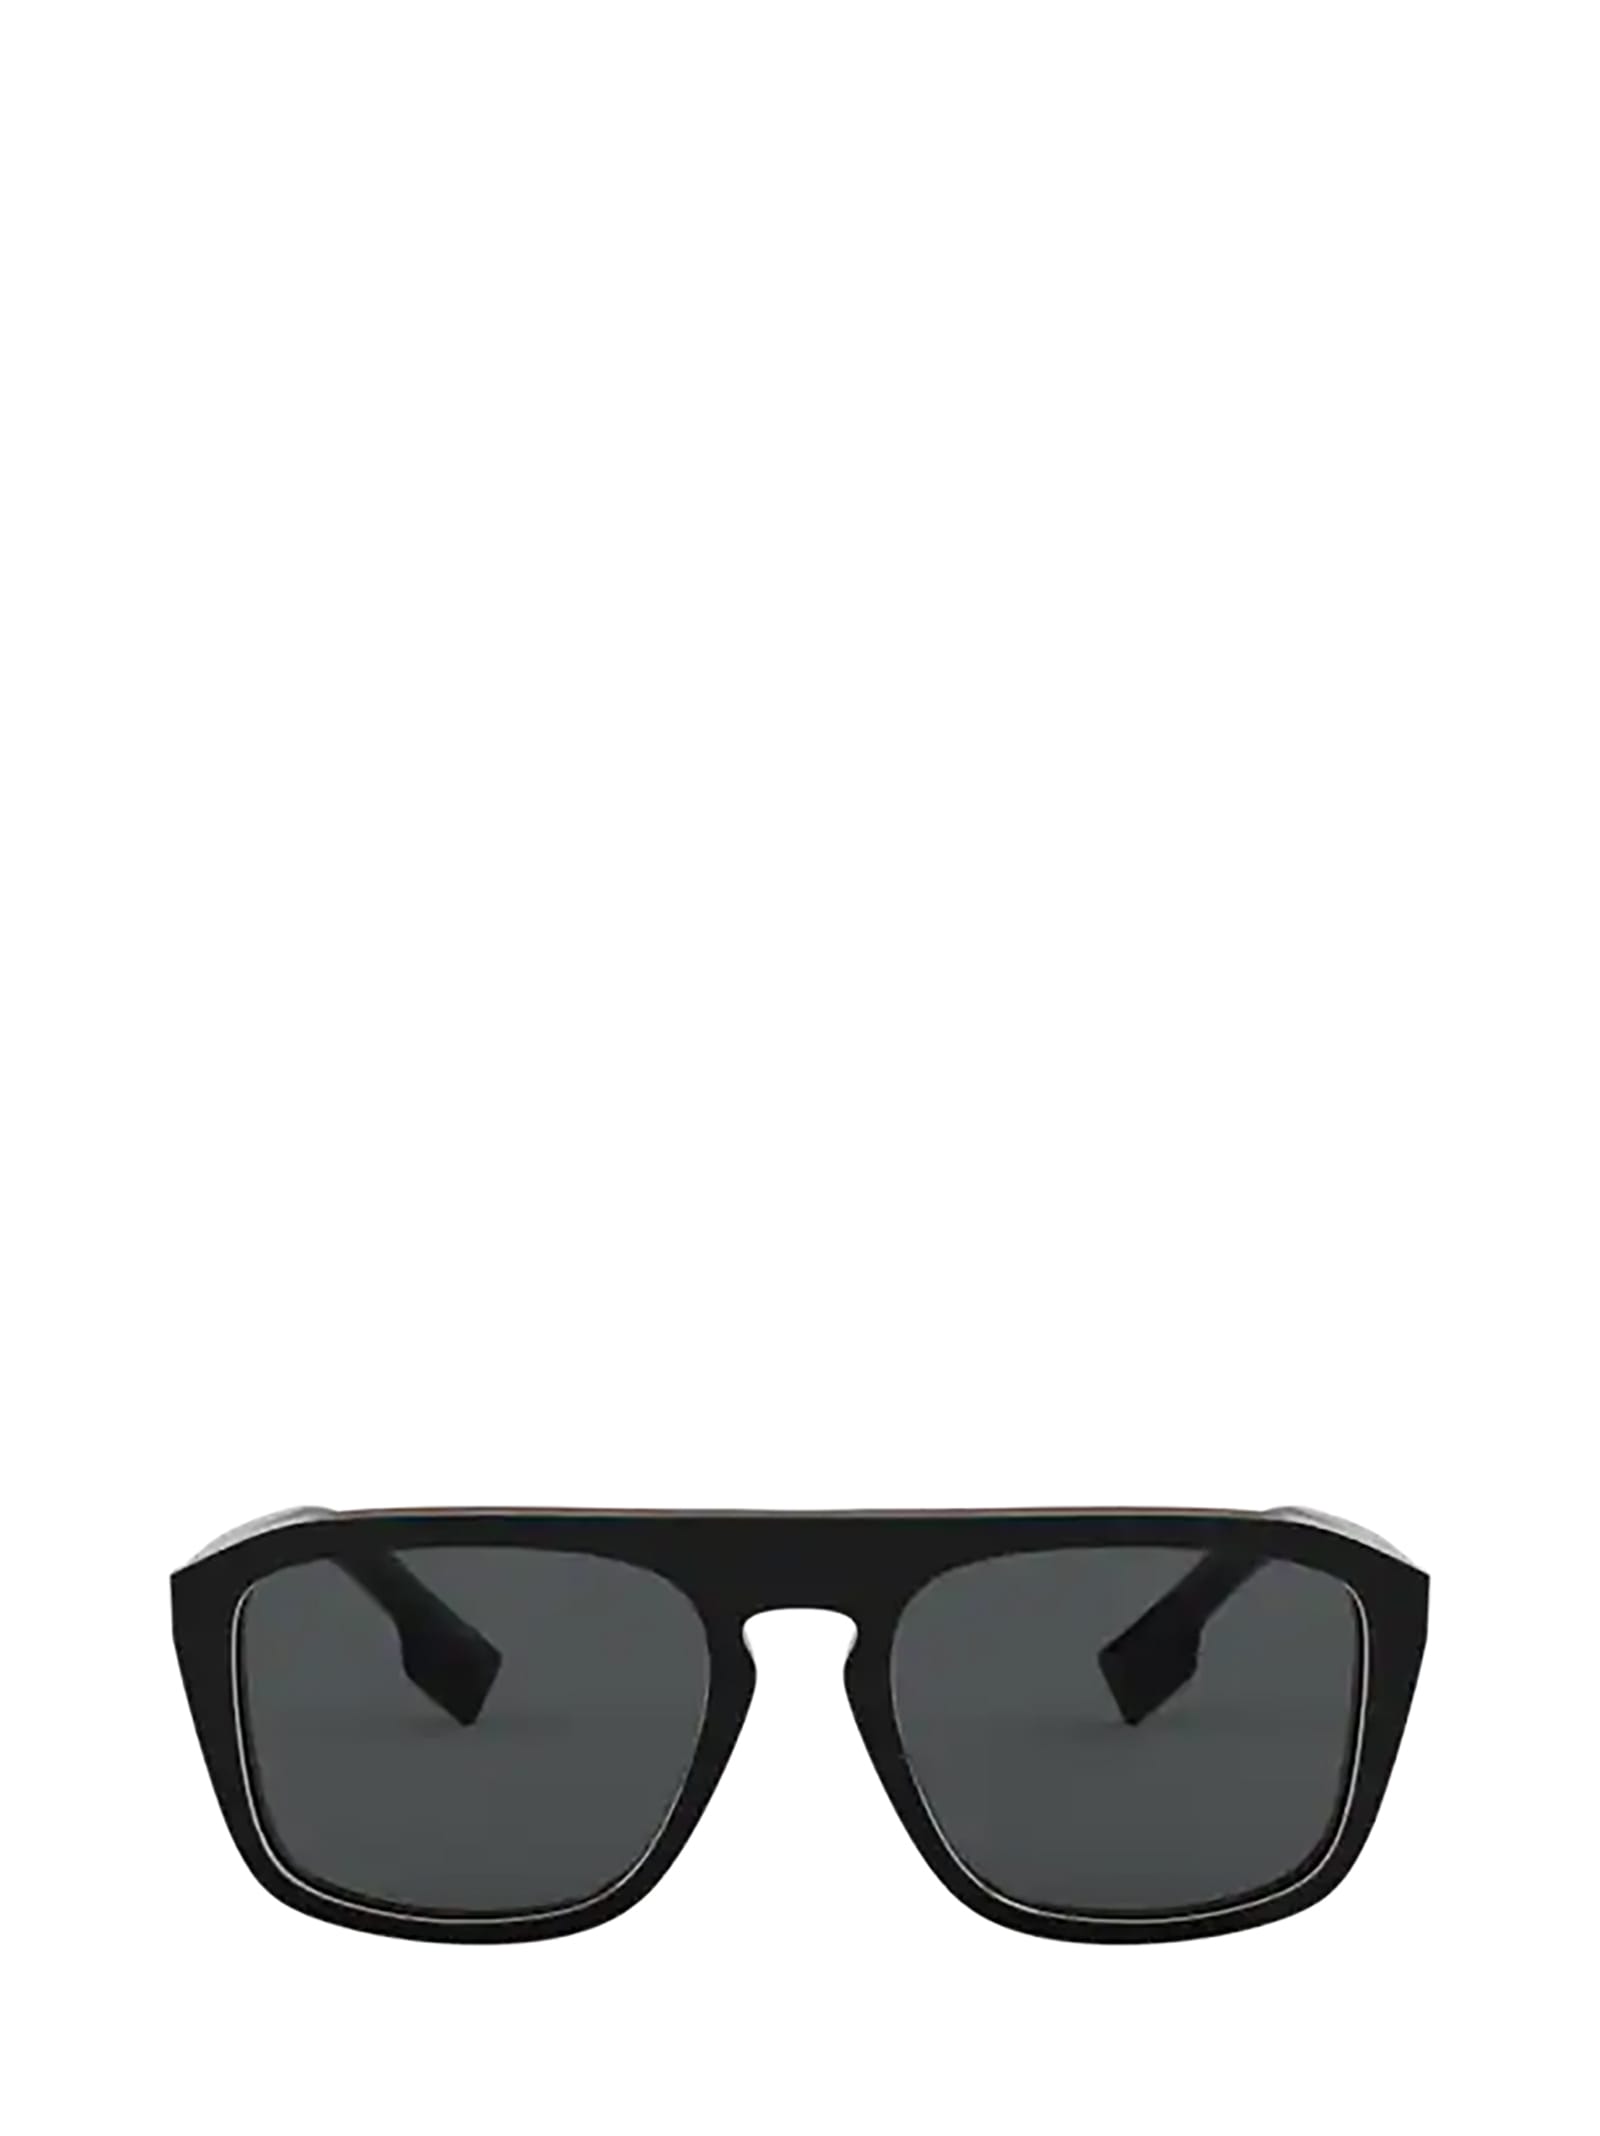 BURBERRY BE4286 CHECK MULTILAYER BLACK SUNGLASSES,BE4286 379881